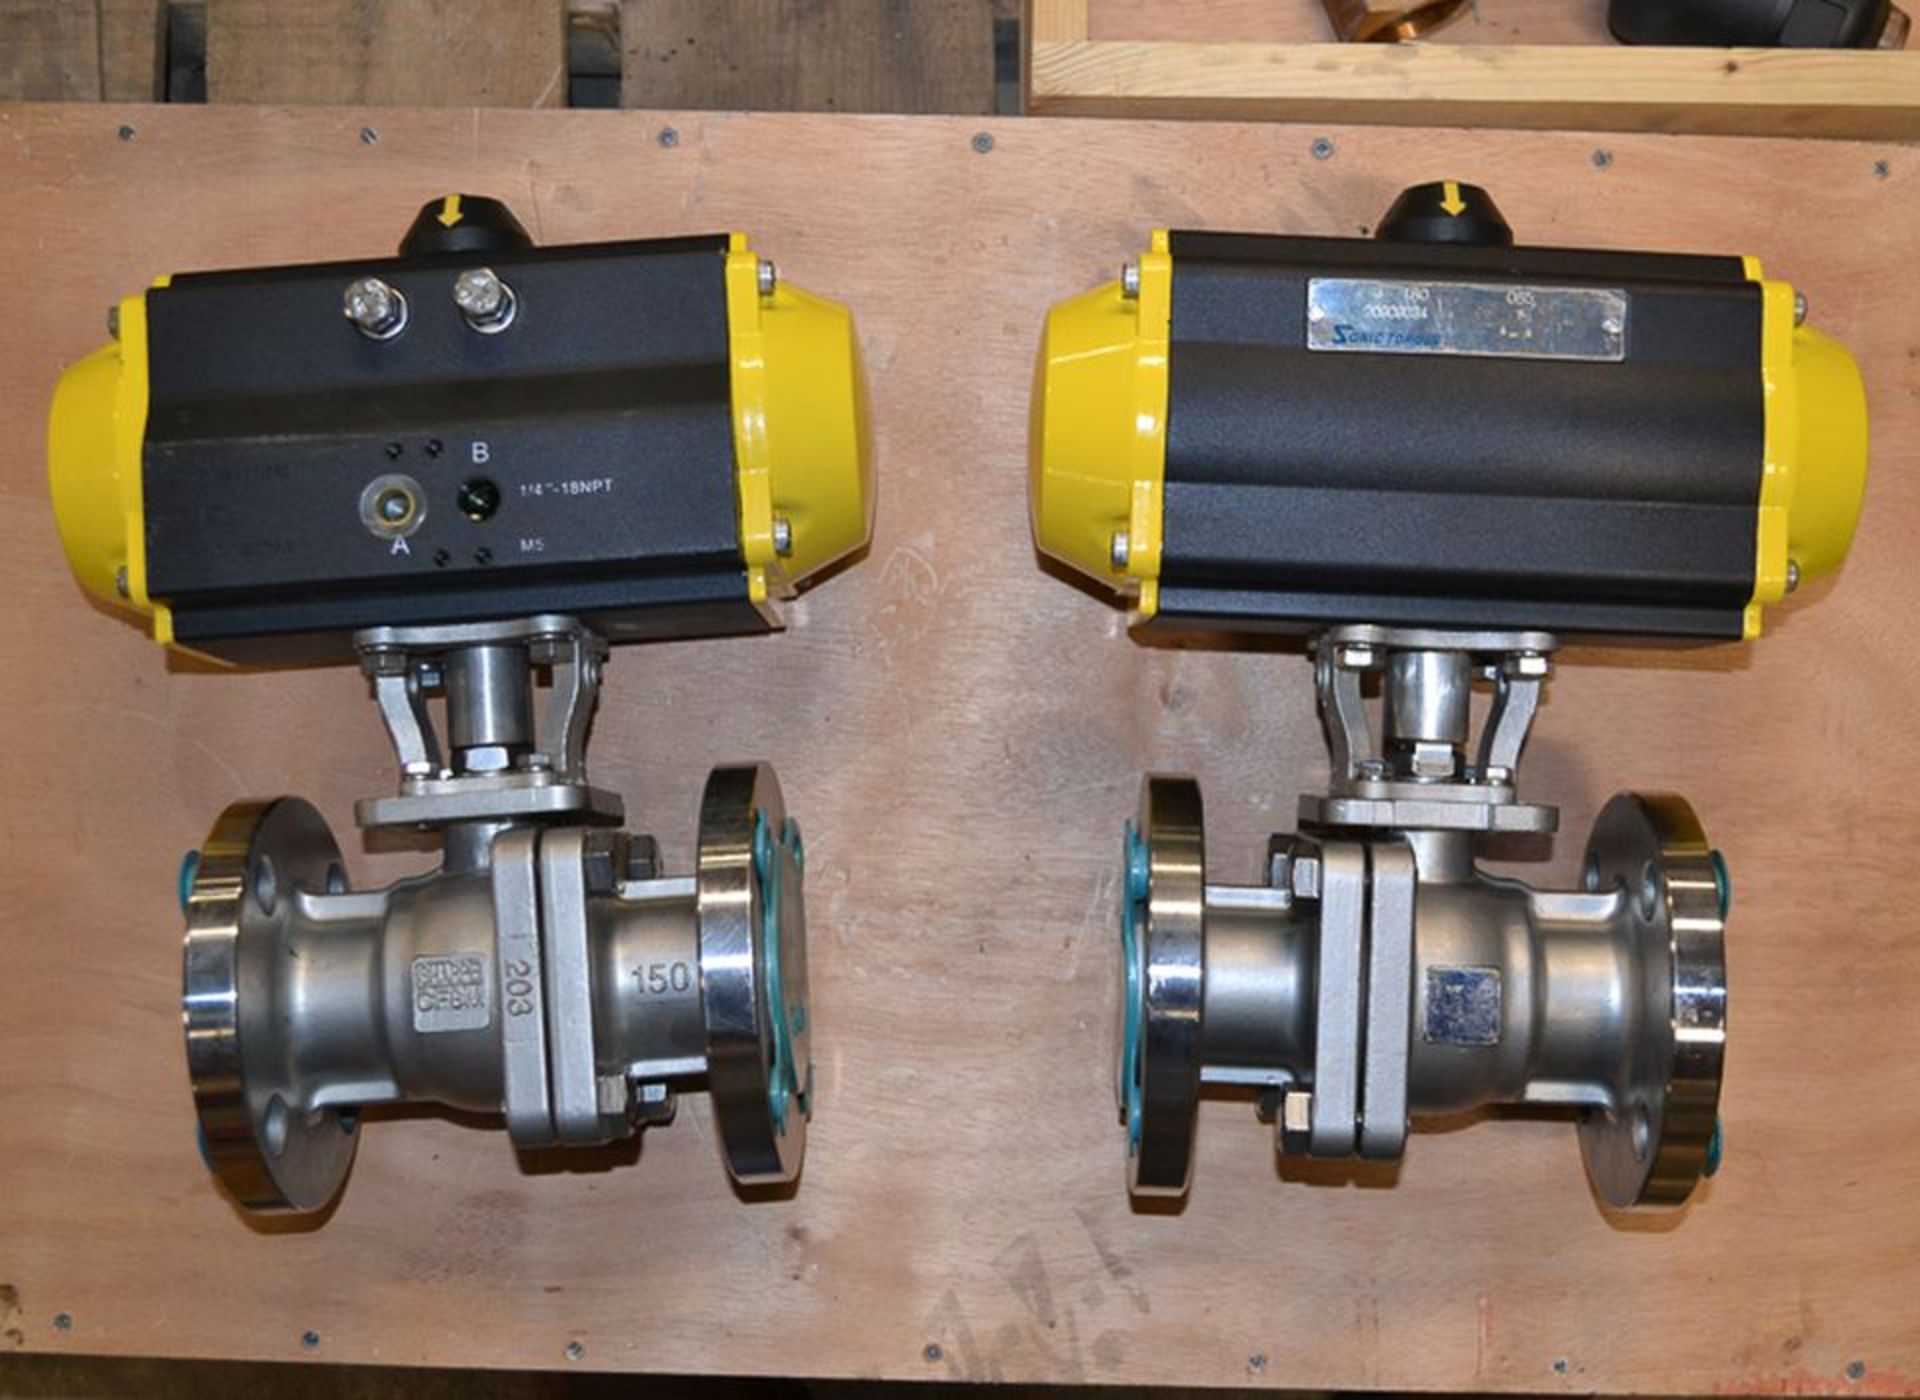 (3) Unused S/S In-Line 1-1/2" Flanged Ball Valves with Actuators and NEW 1-1/2" S/S Ball Valves-